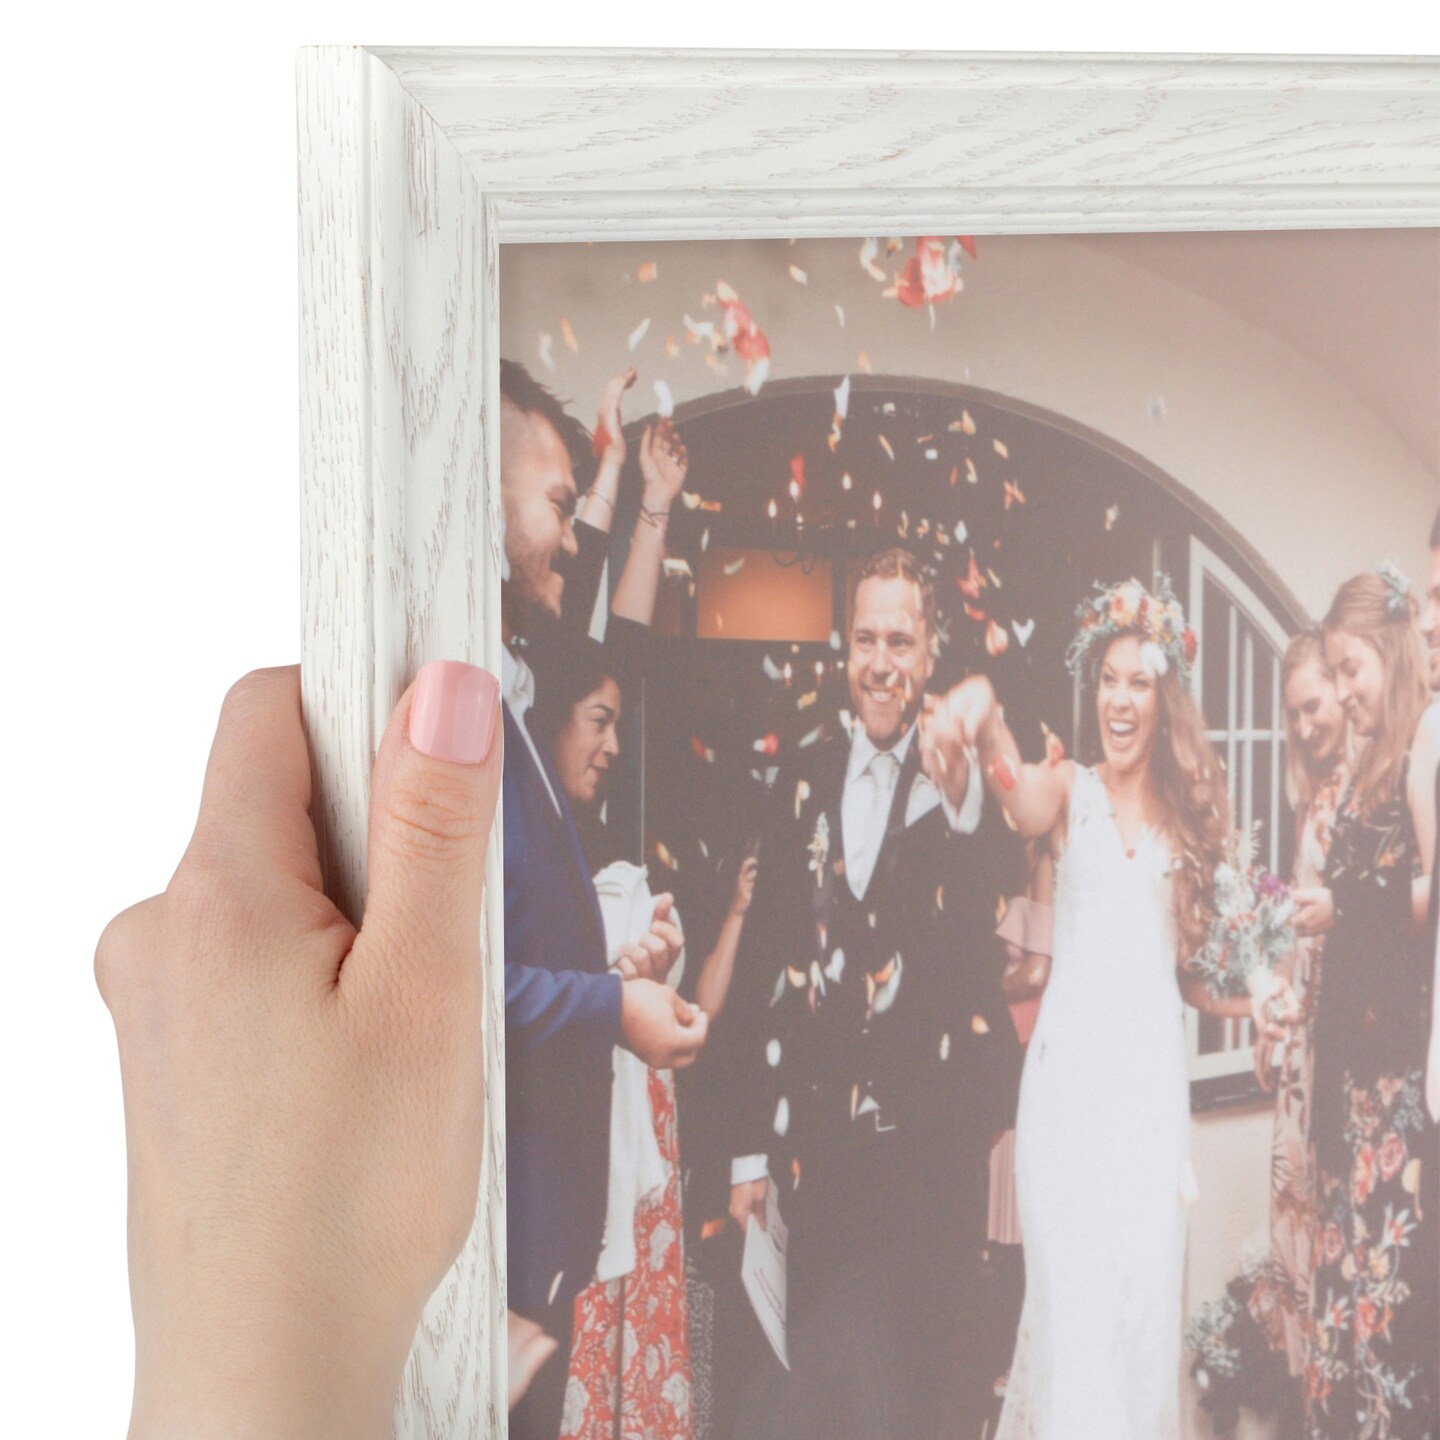 ArtToFrames 16x24 Inch Picture Frame, This 1.25 Inch Custom Wood Poster  Frame is Available in Multiple Colors, Great for Your Art or Photos - Comes  with Regular Acrylic and Foam Backing 3/16